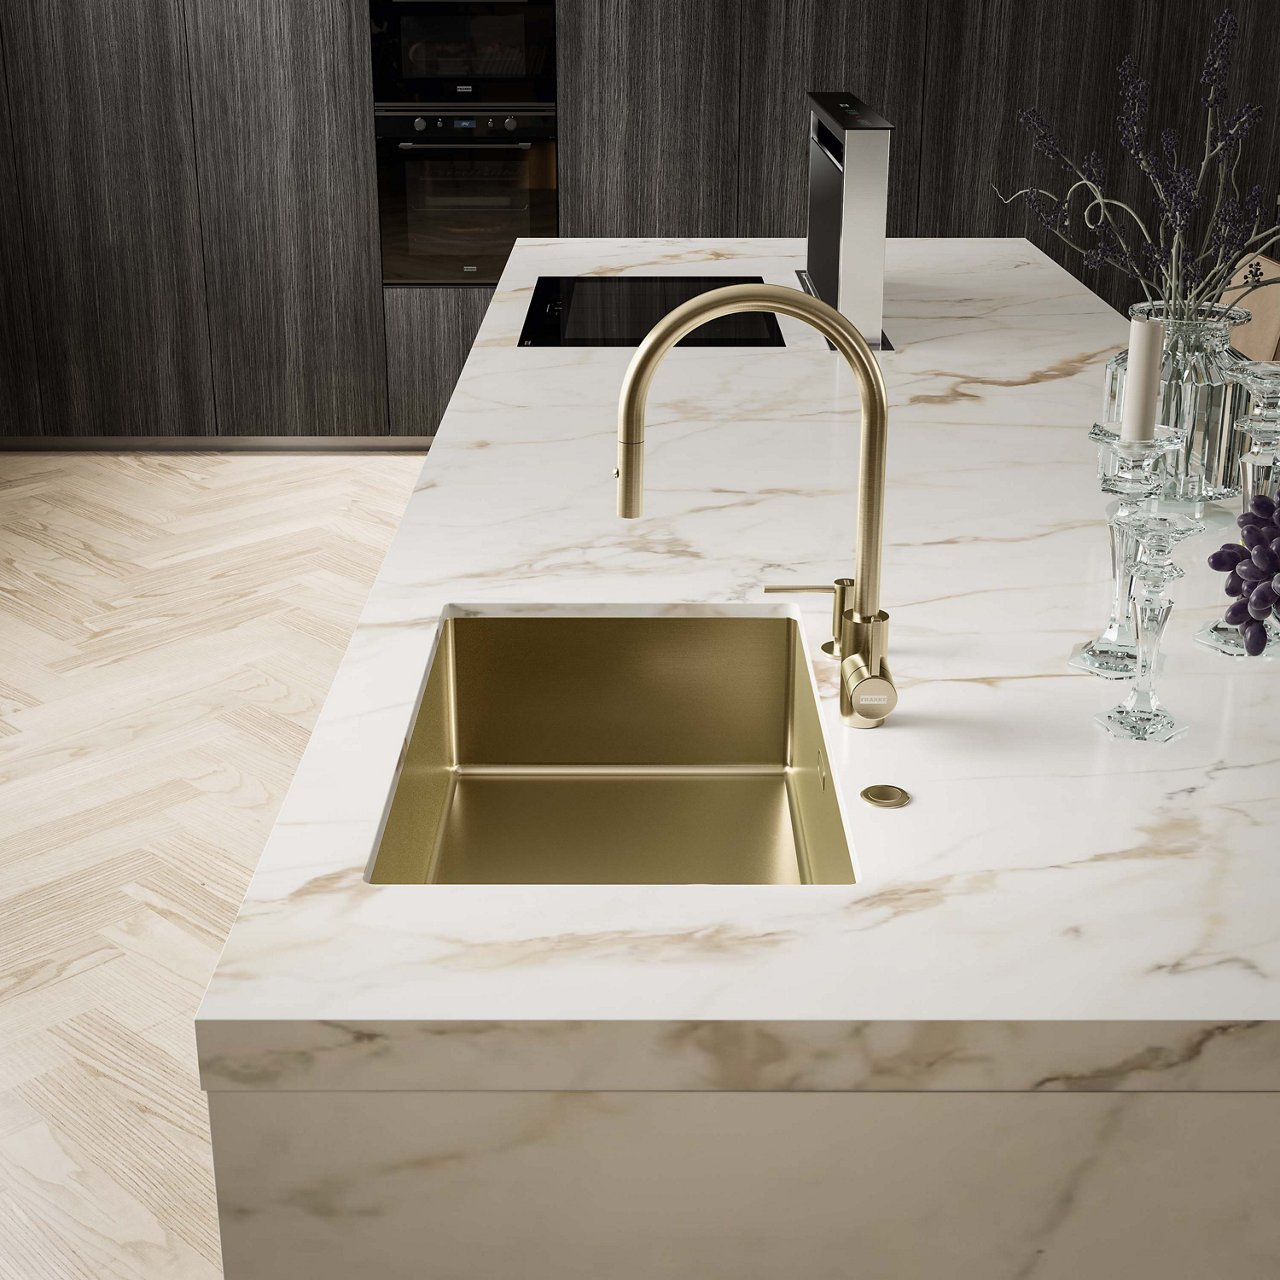 Mythos Masterpiece sink in Gold with Eos Neo Gold Faucet